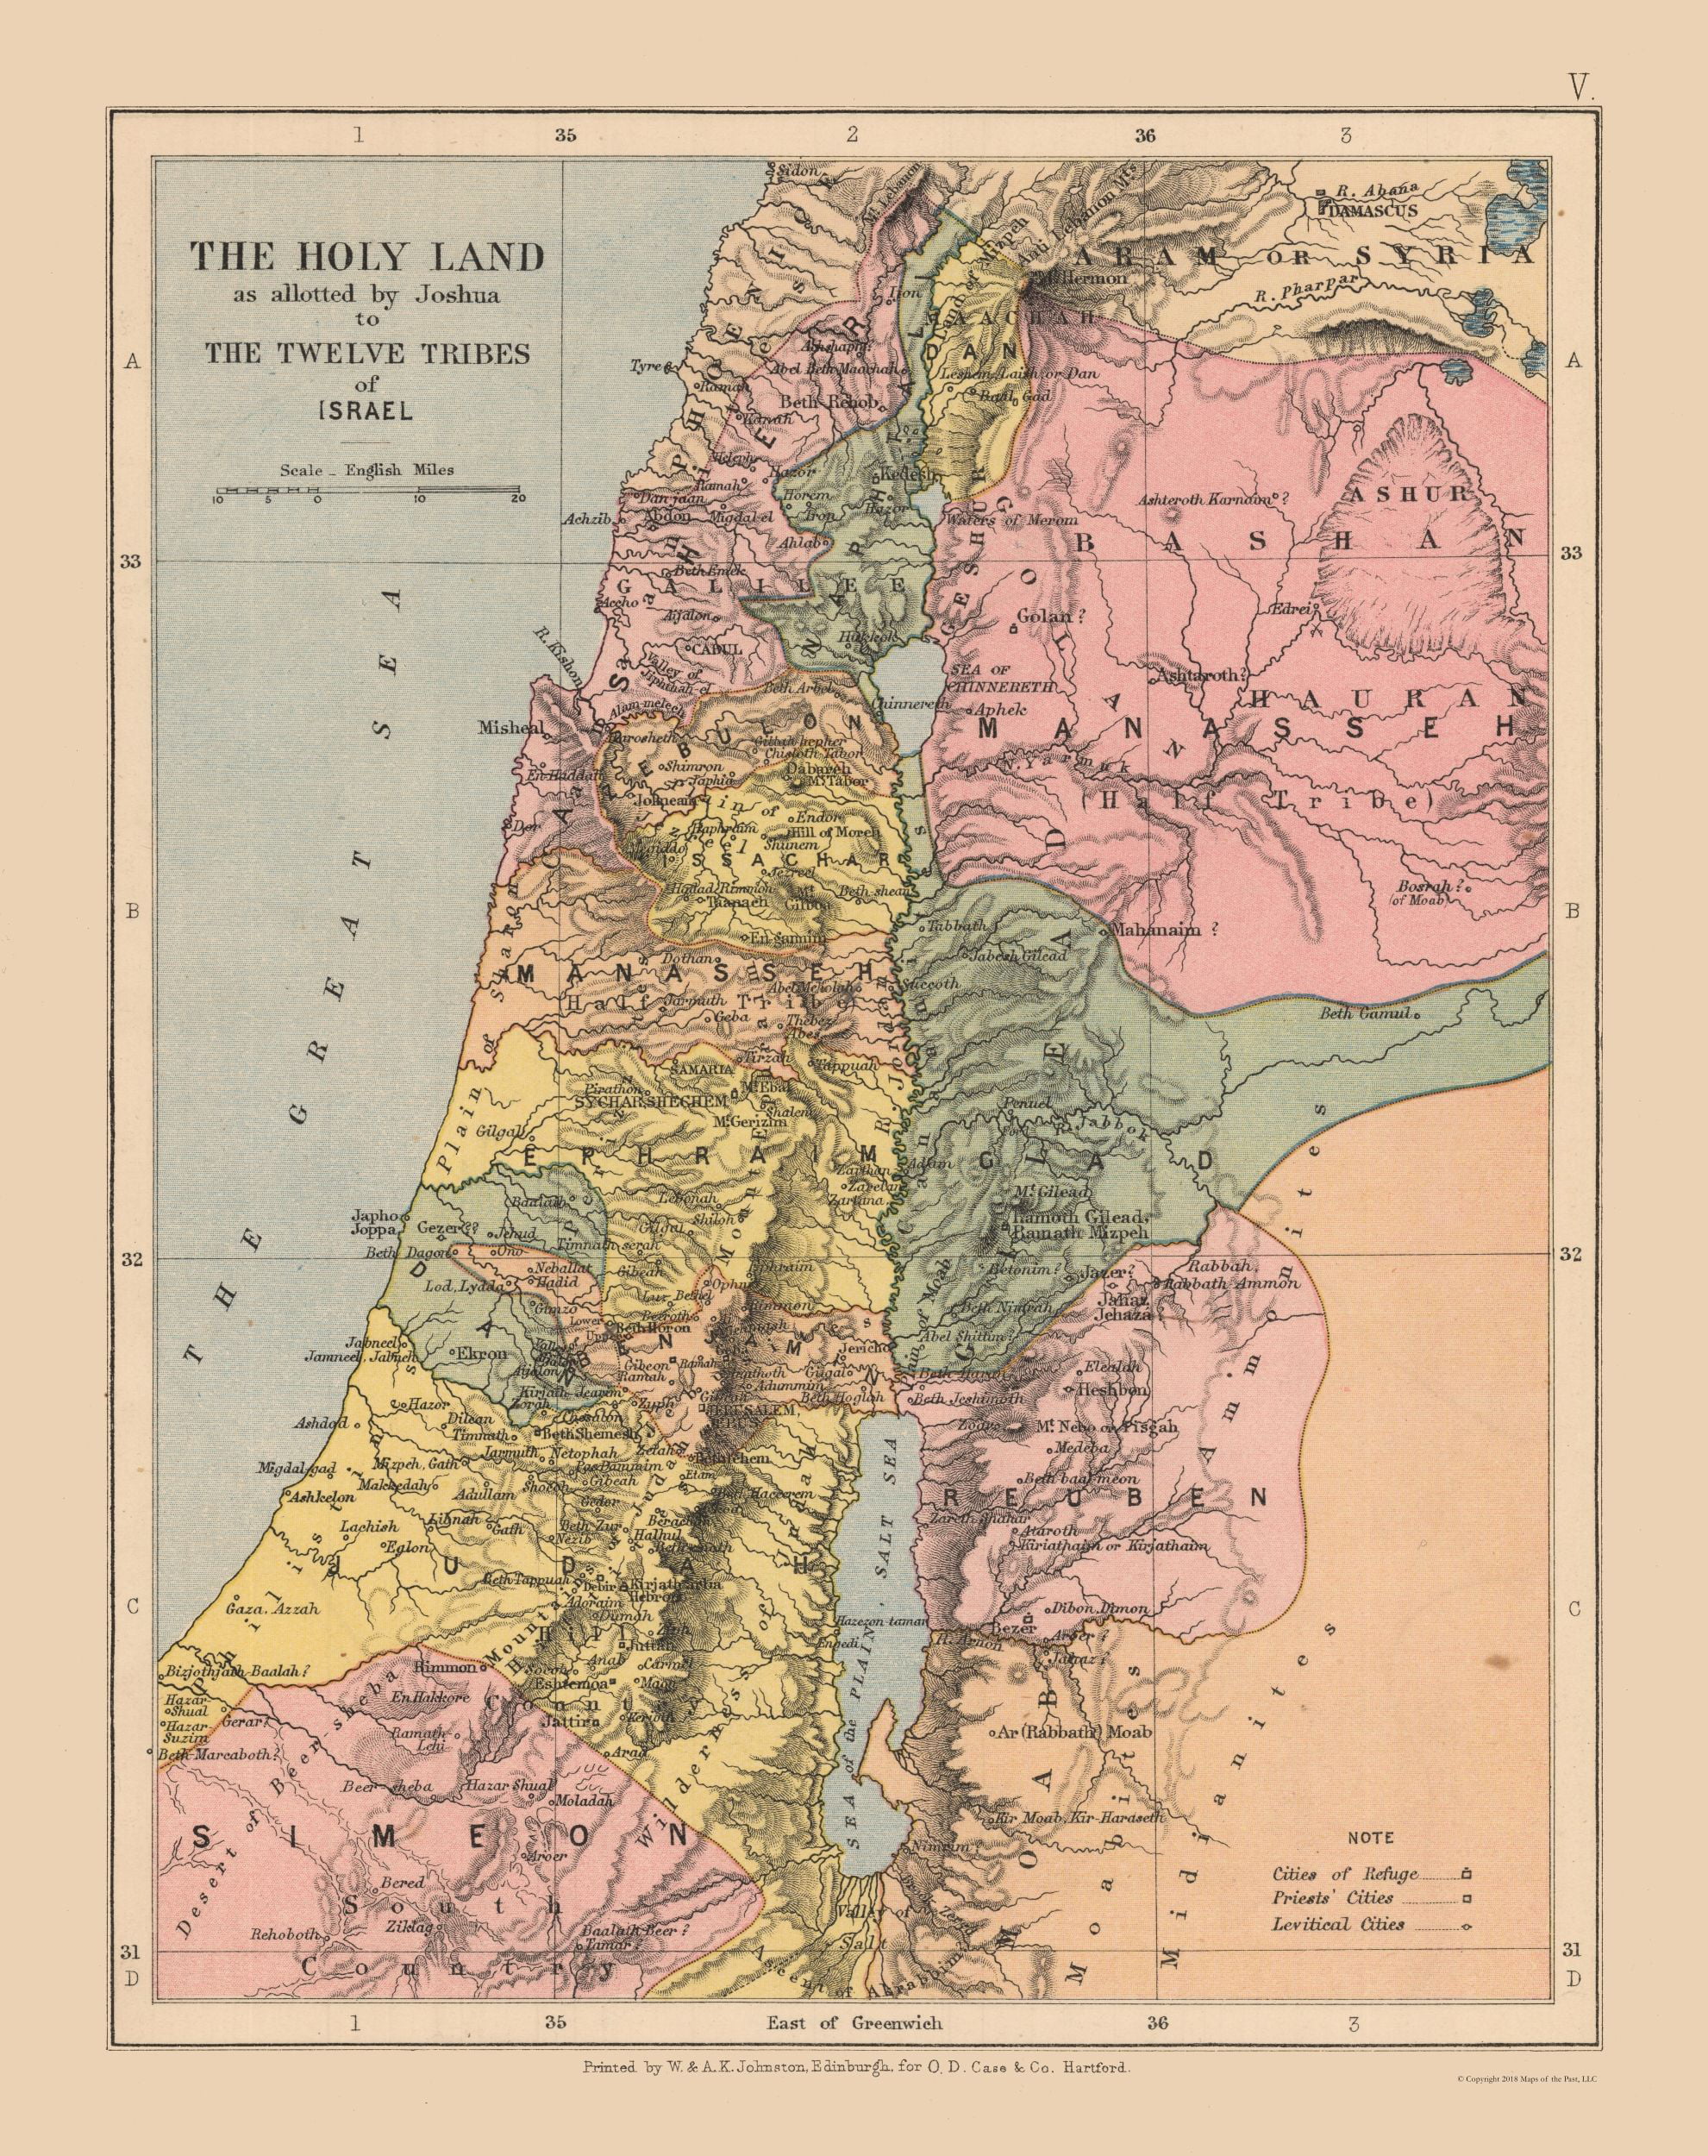 Holy Land Divided by 12 Tribes of Israel Homann 1750-25 x 23 